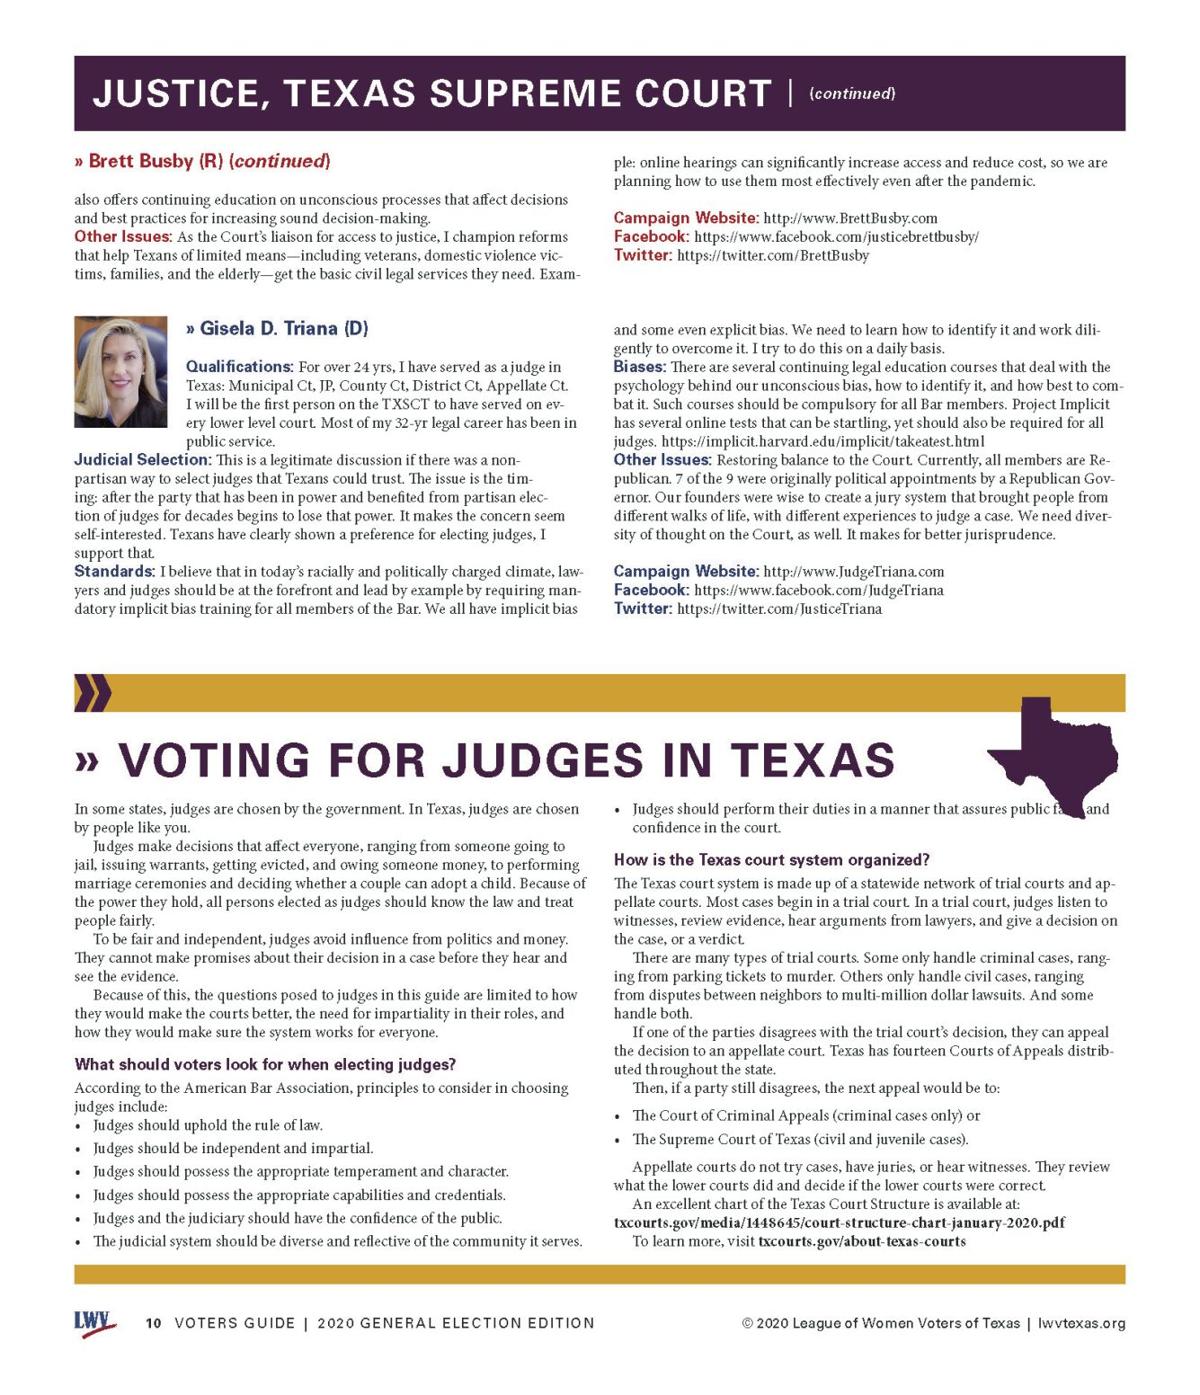 League of Women Voters of Texas nonpartisan guide for Nov. 3 election